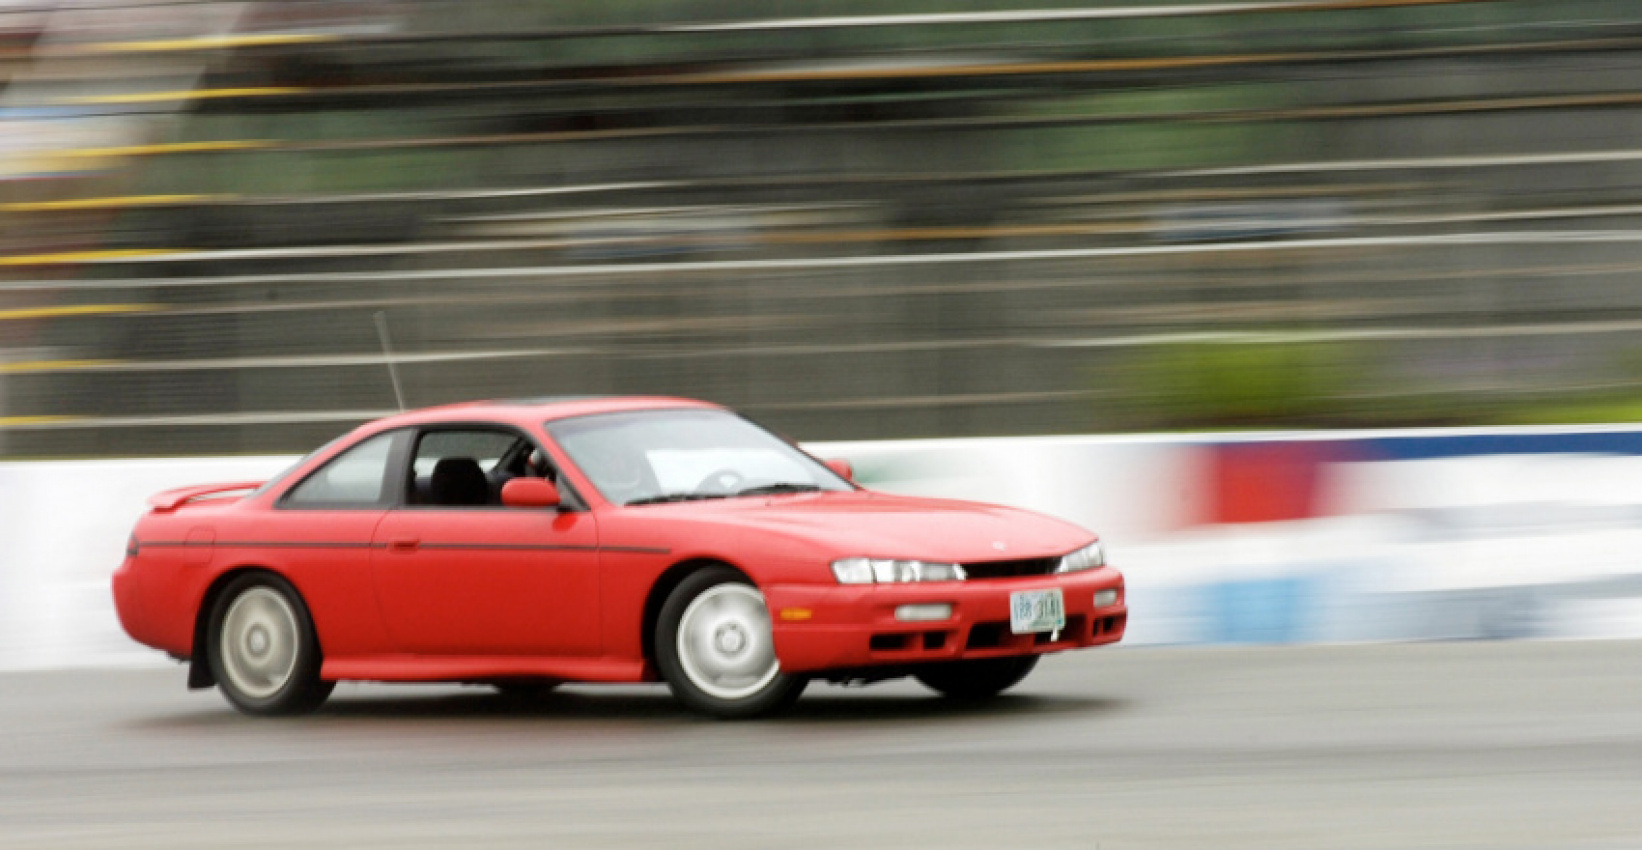 autos, cars, ford, drifting, motorsport, nissan, drifting in your dreams? here are 5 affordable cars to get into drifting